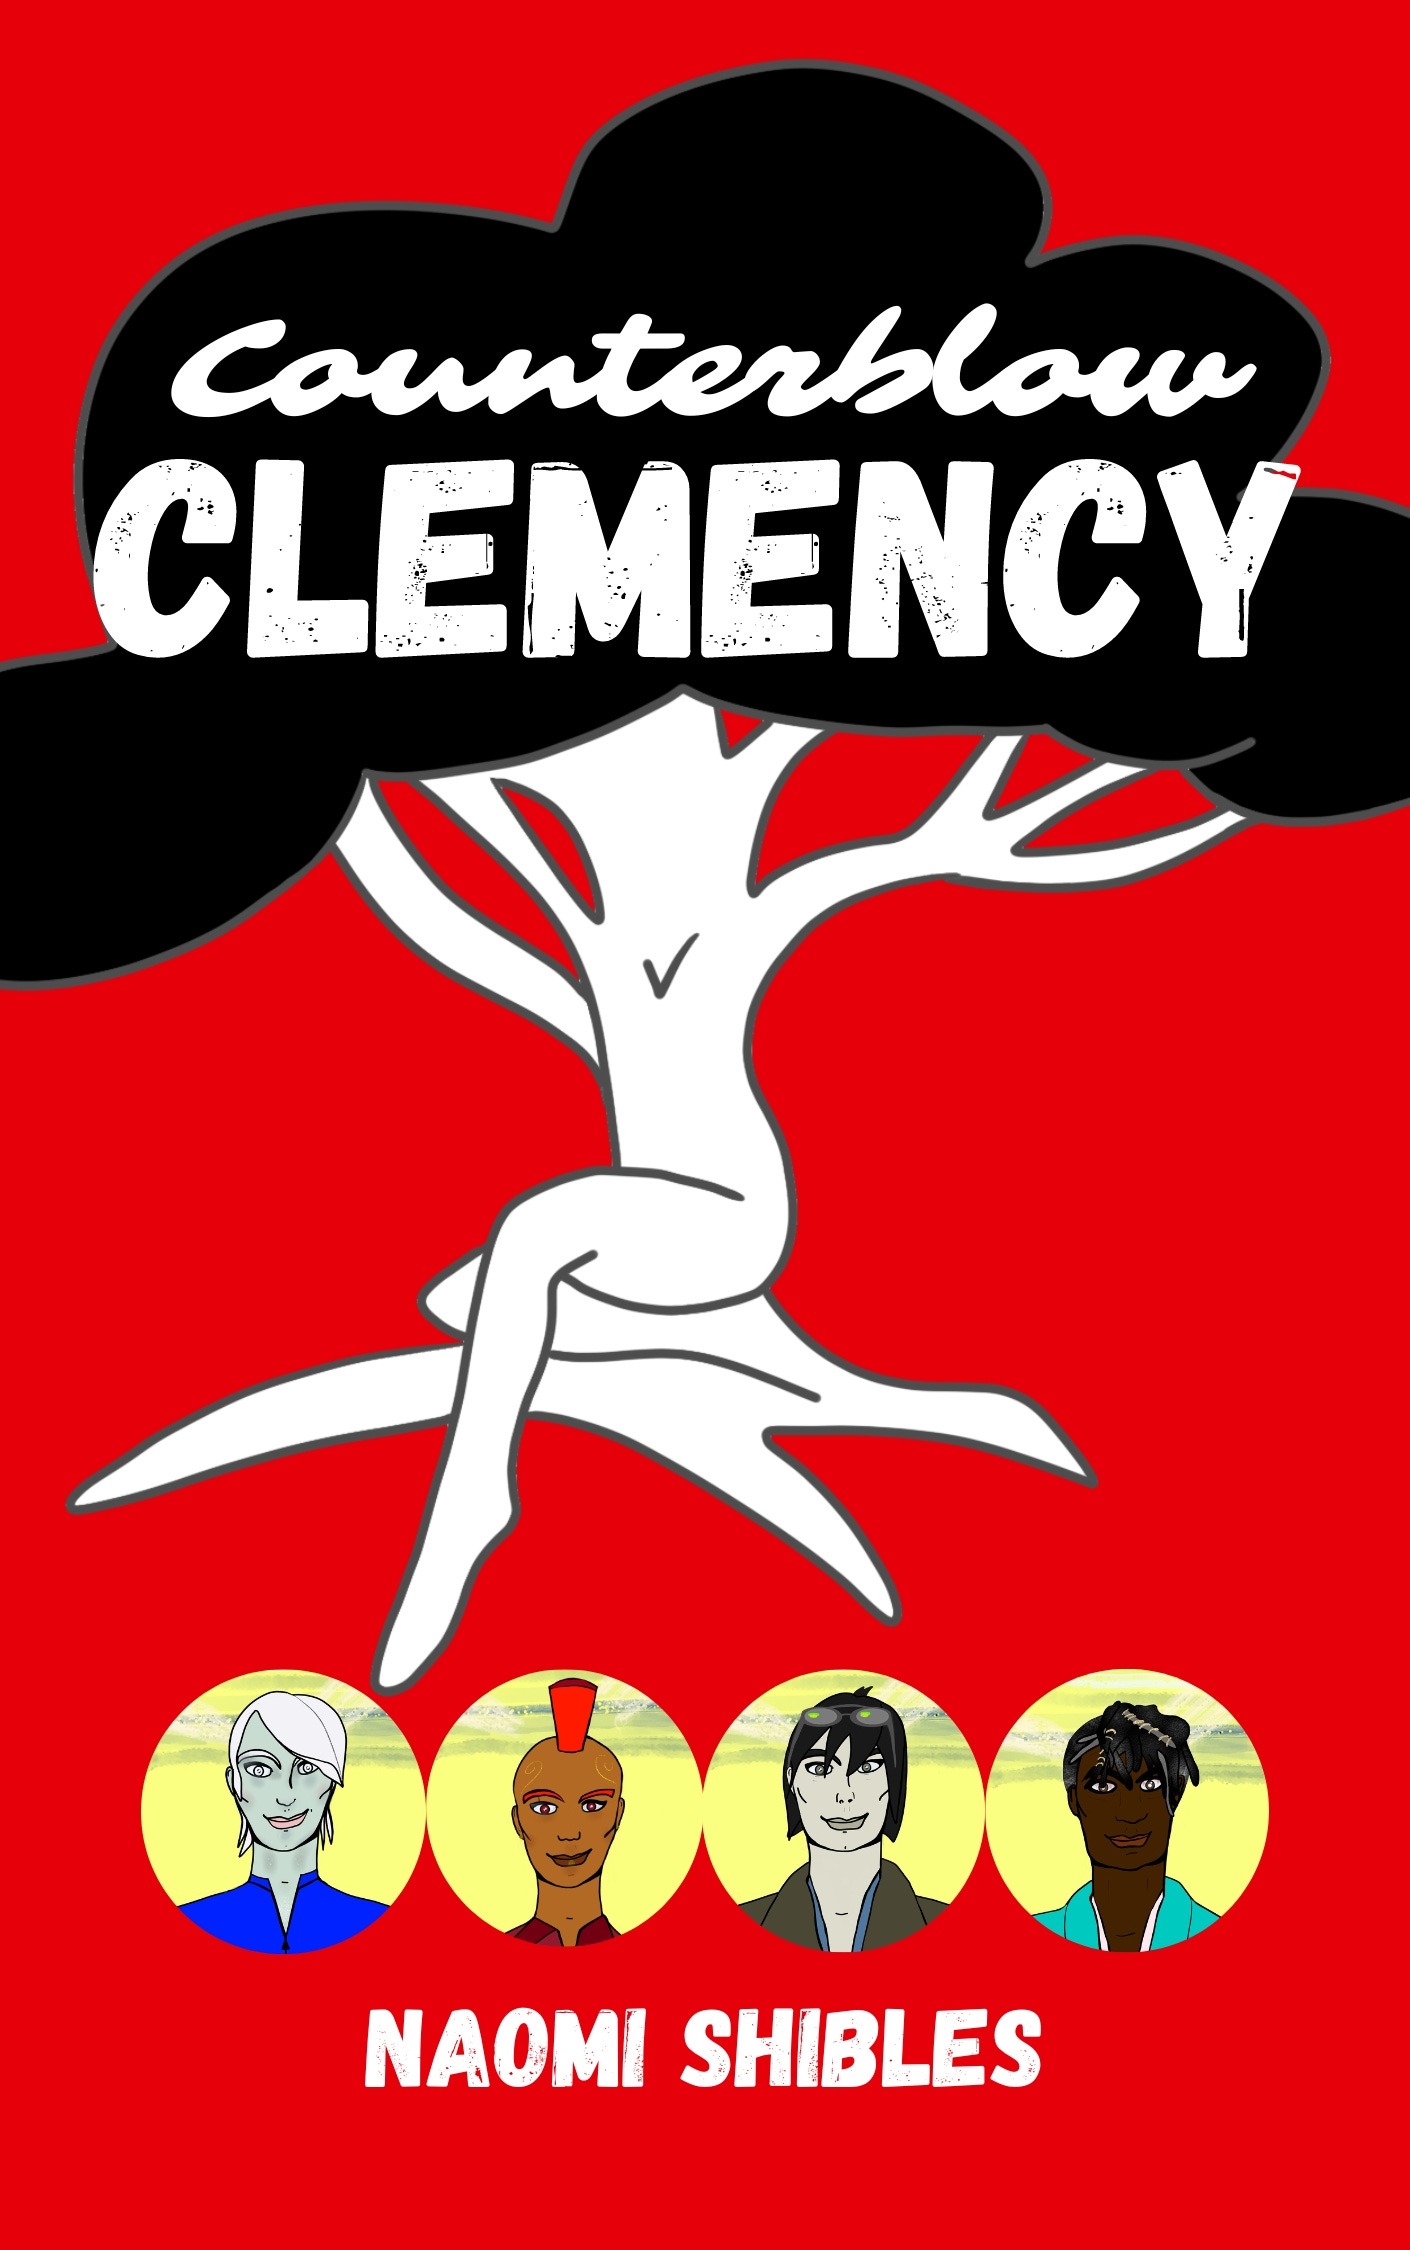 Counterblow Clemency, a novel by Naomi Shibles